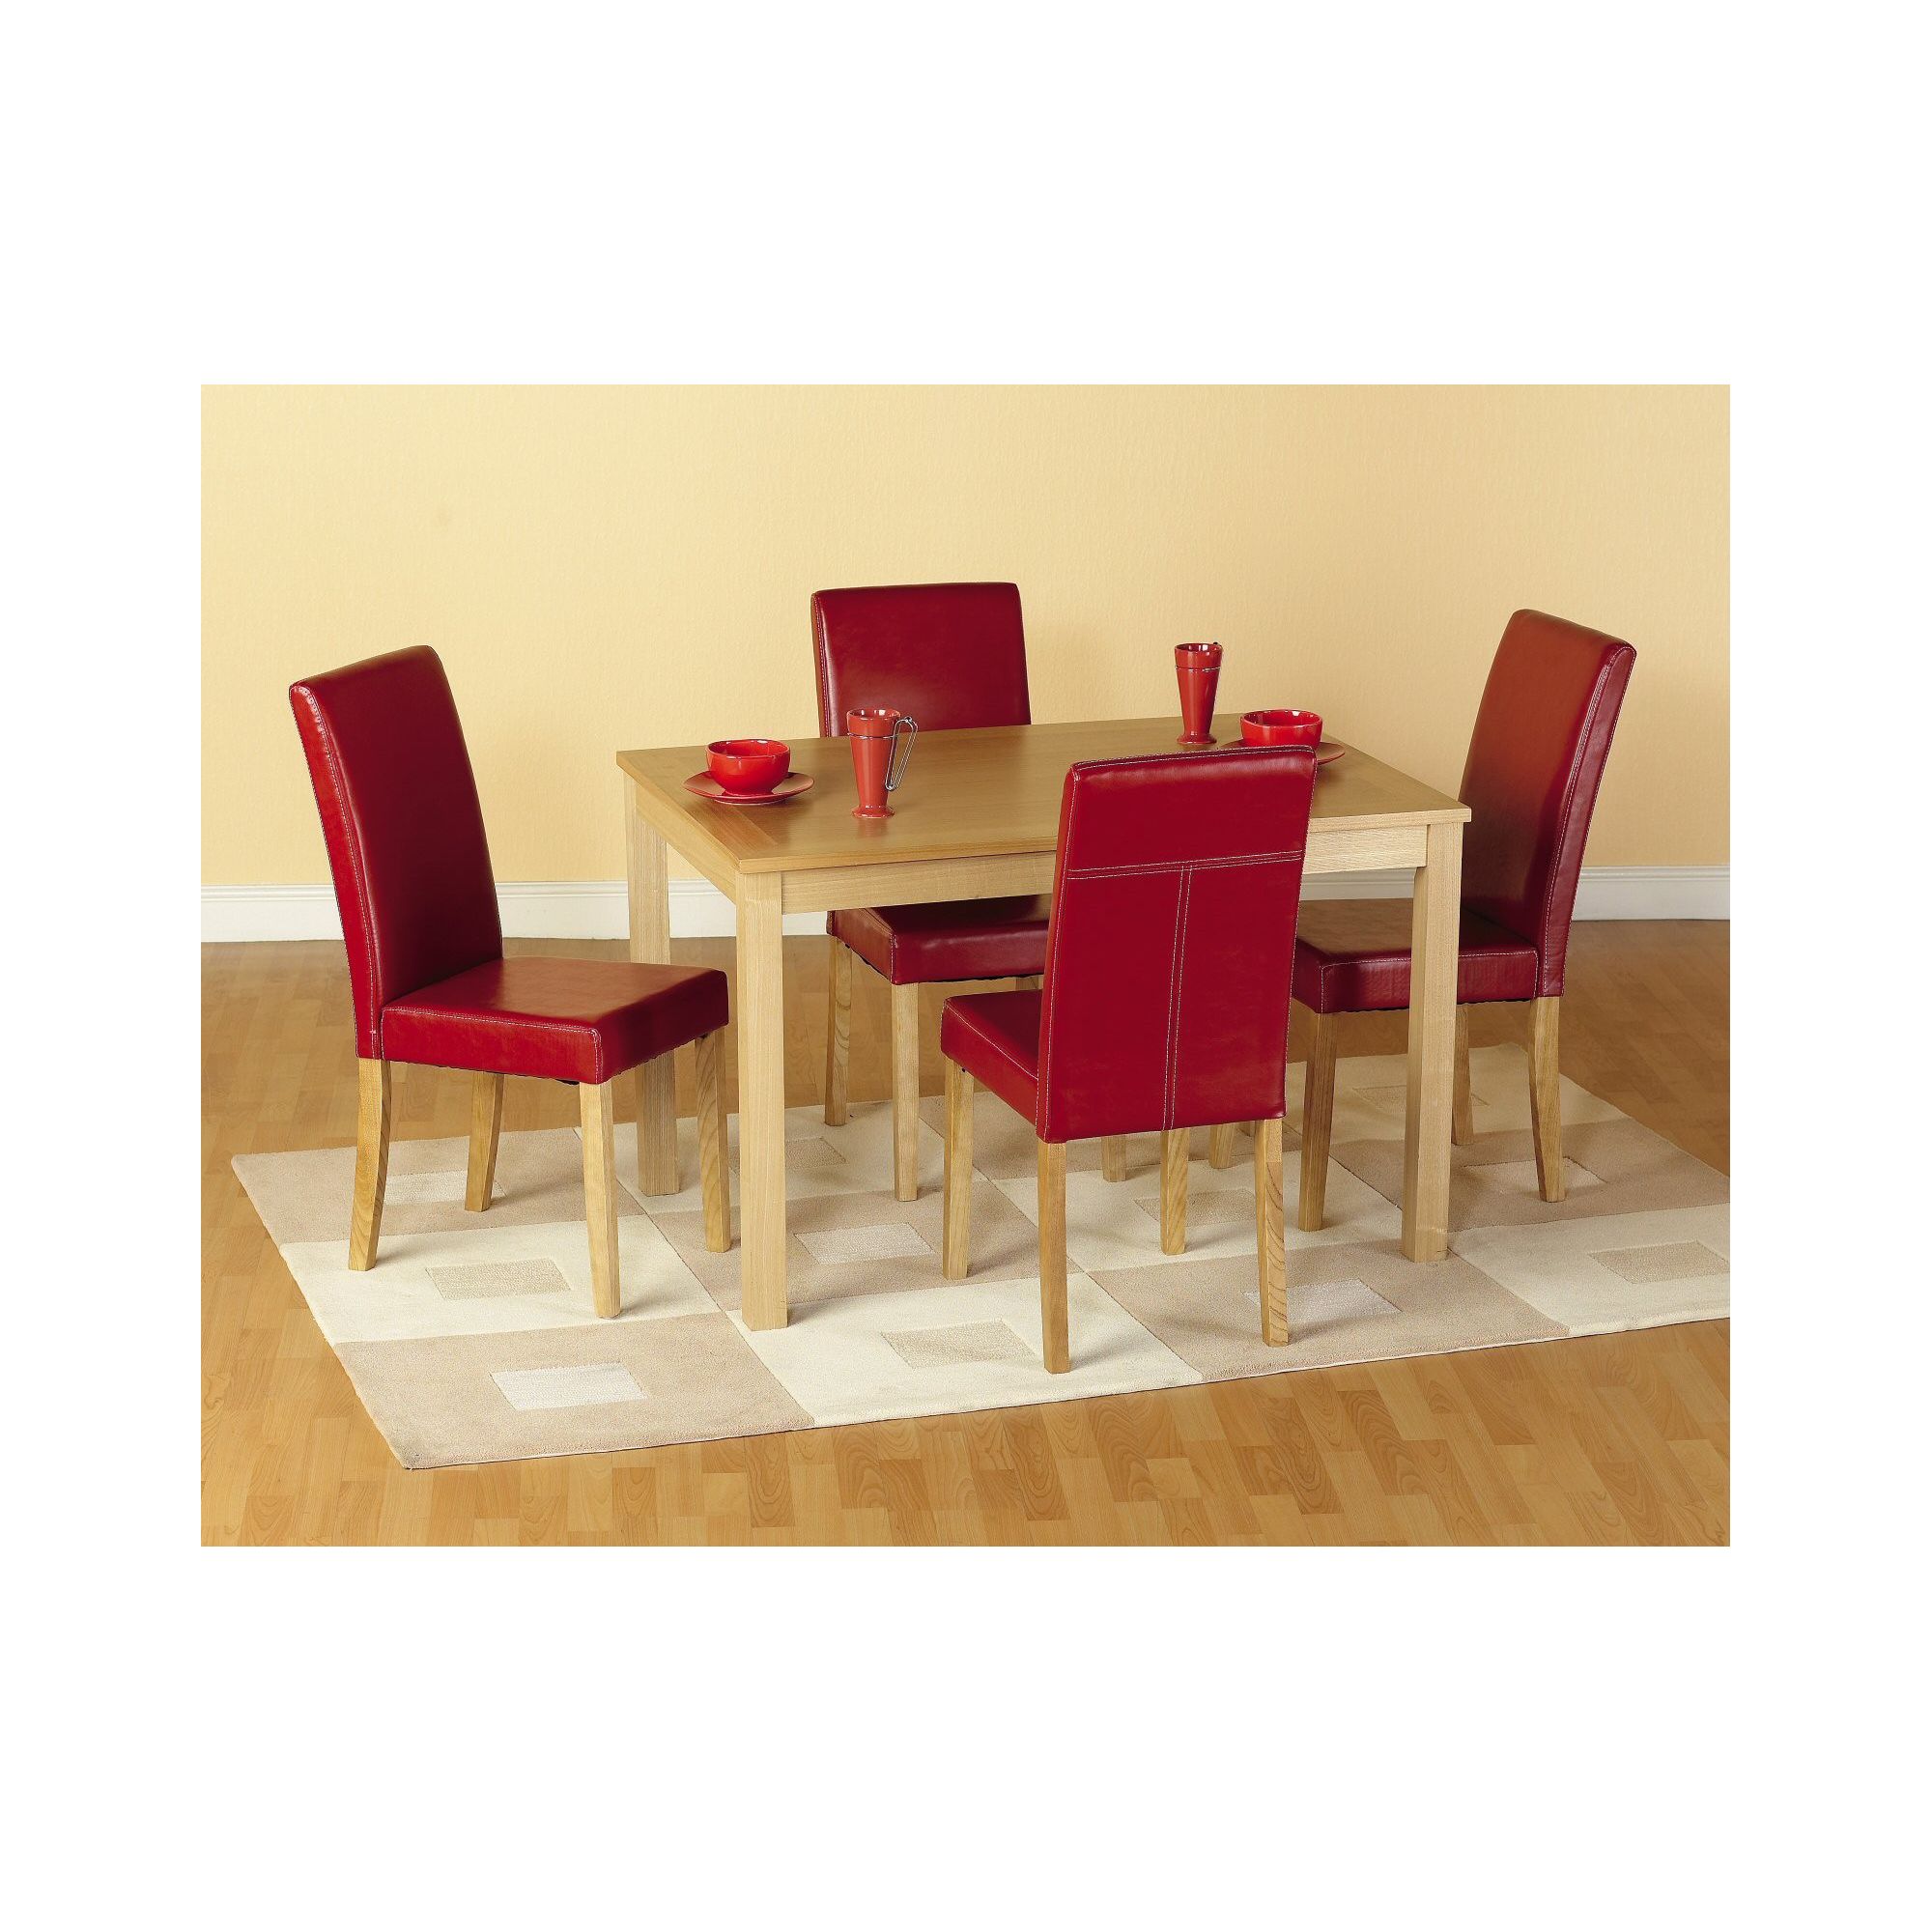 Home Essence Oakmere 5 Piece Dining Set - Rustic Red at Tesco Direct